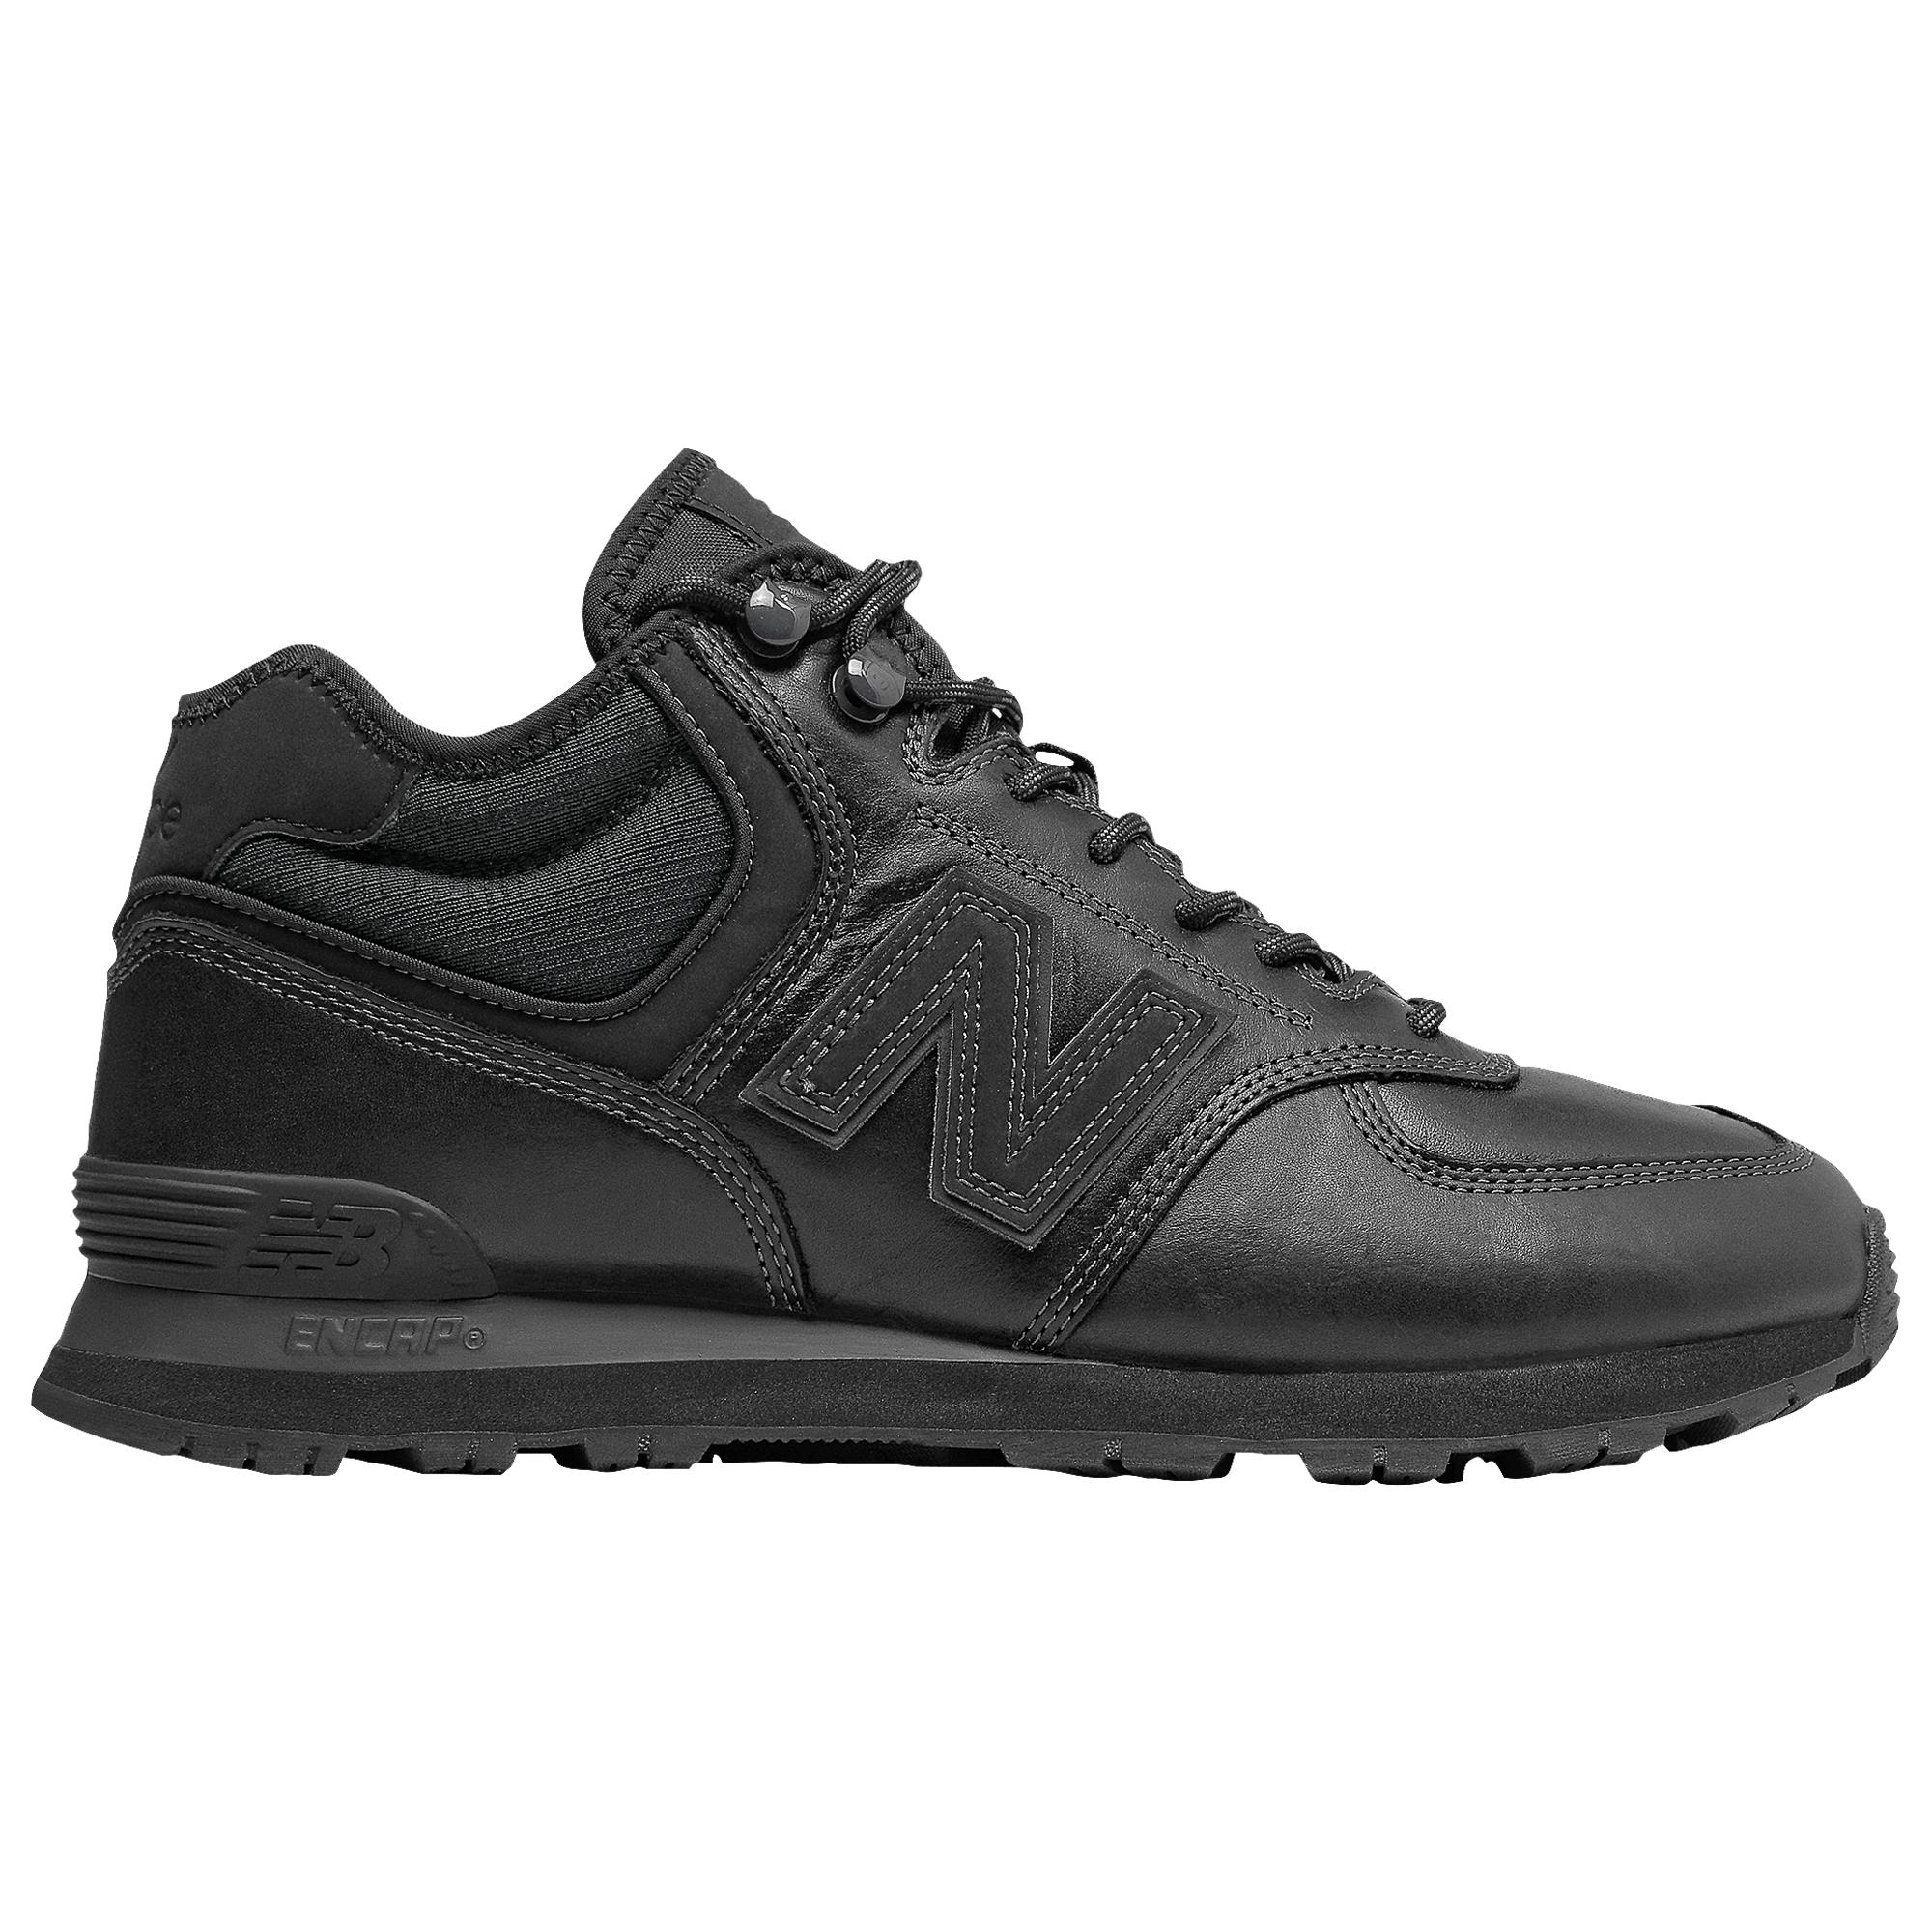 New Balance Leather 574 Mid-cut Running Shoes in Black for Men - Lyst